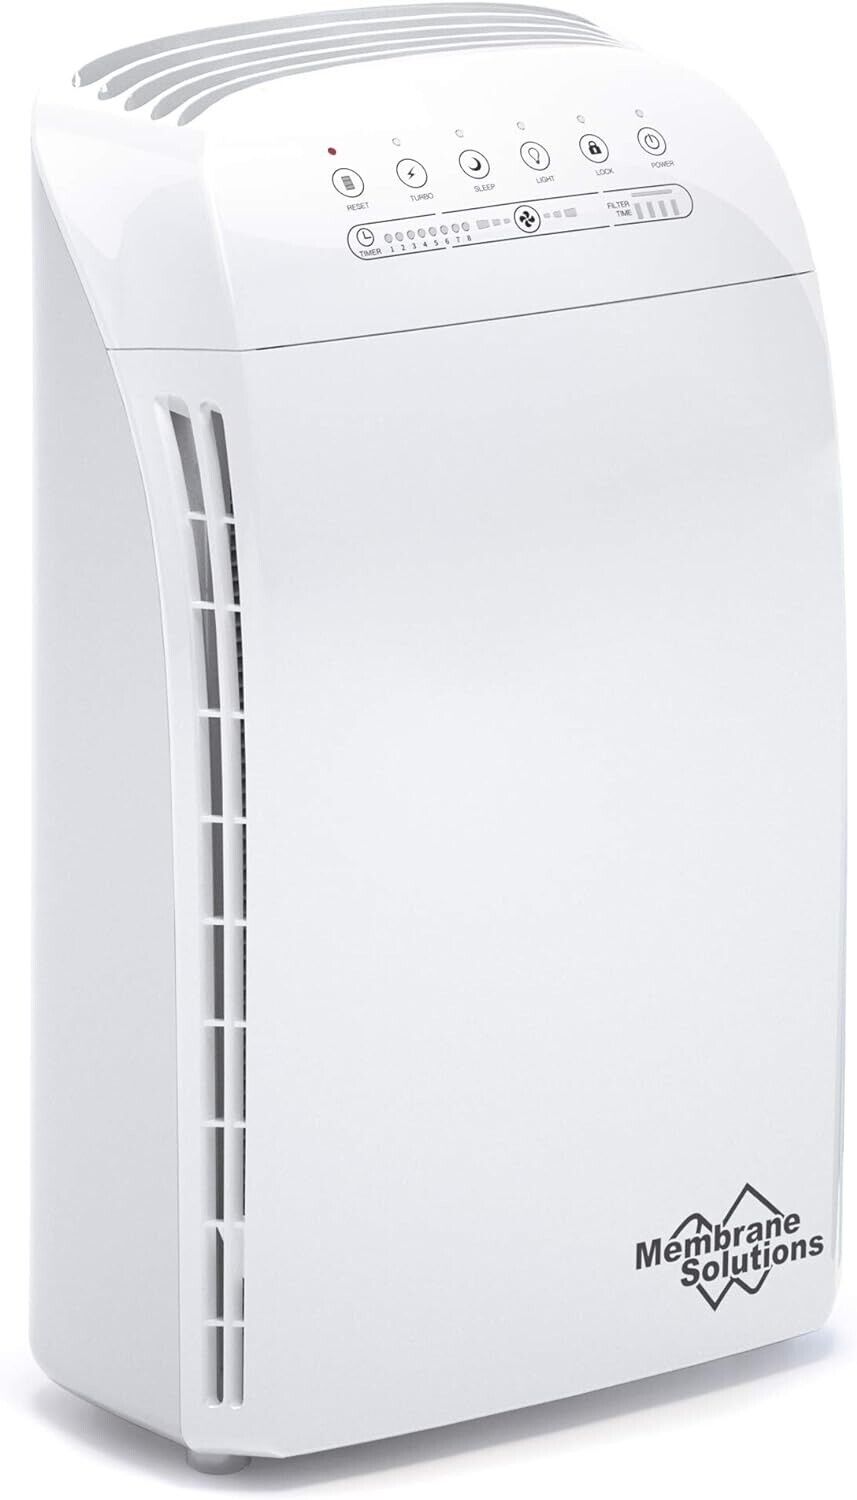 MSA3 Quiet HEPA Air Purifier For Large Room and Bedroom Space 600 800 1500 Sq.Ft